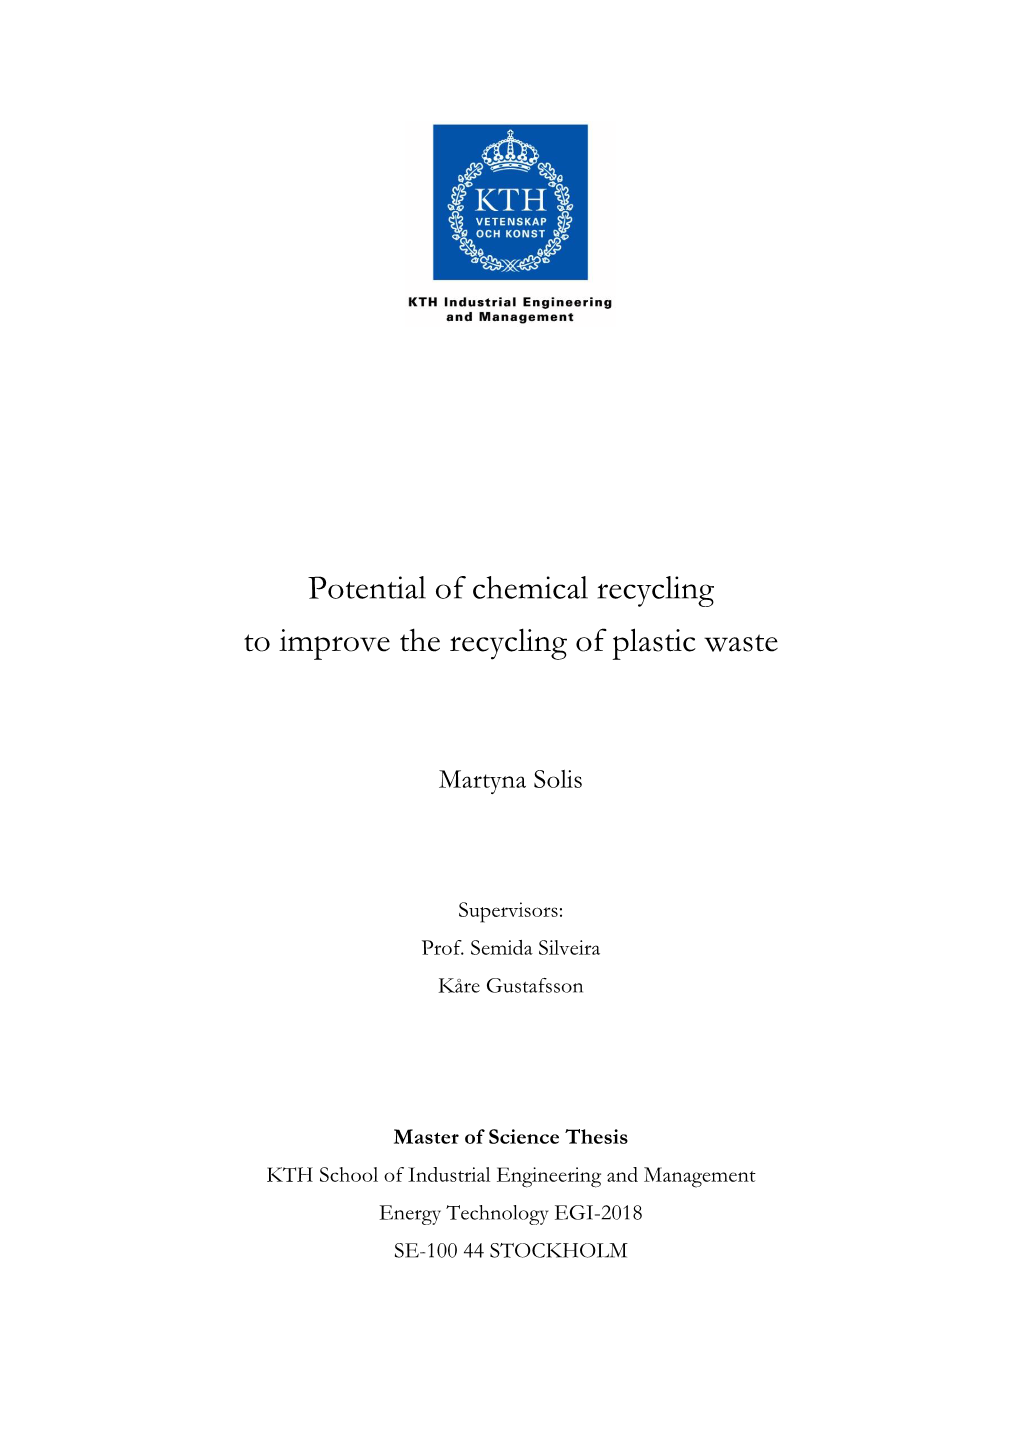 Potential of Chemical Recycling to Improve the Recycling of Plastic Waste